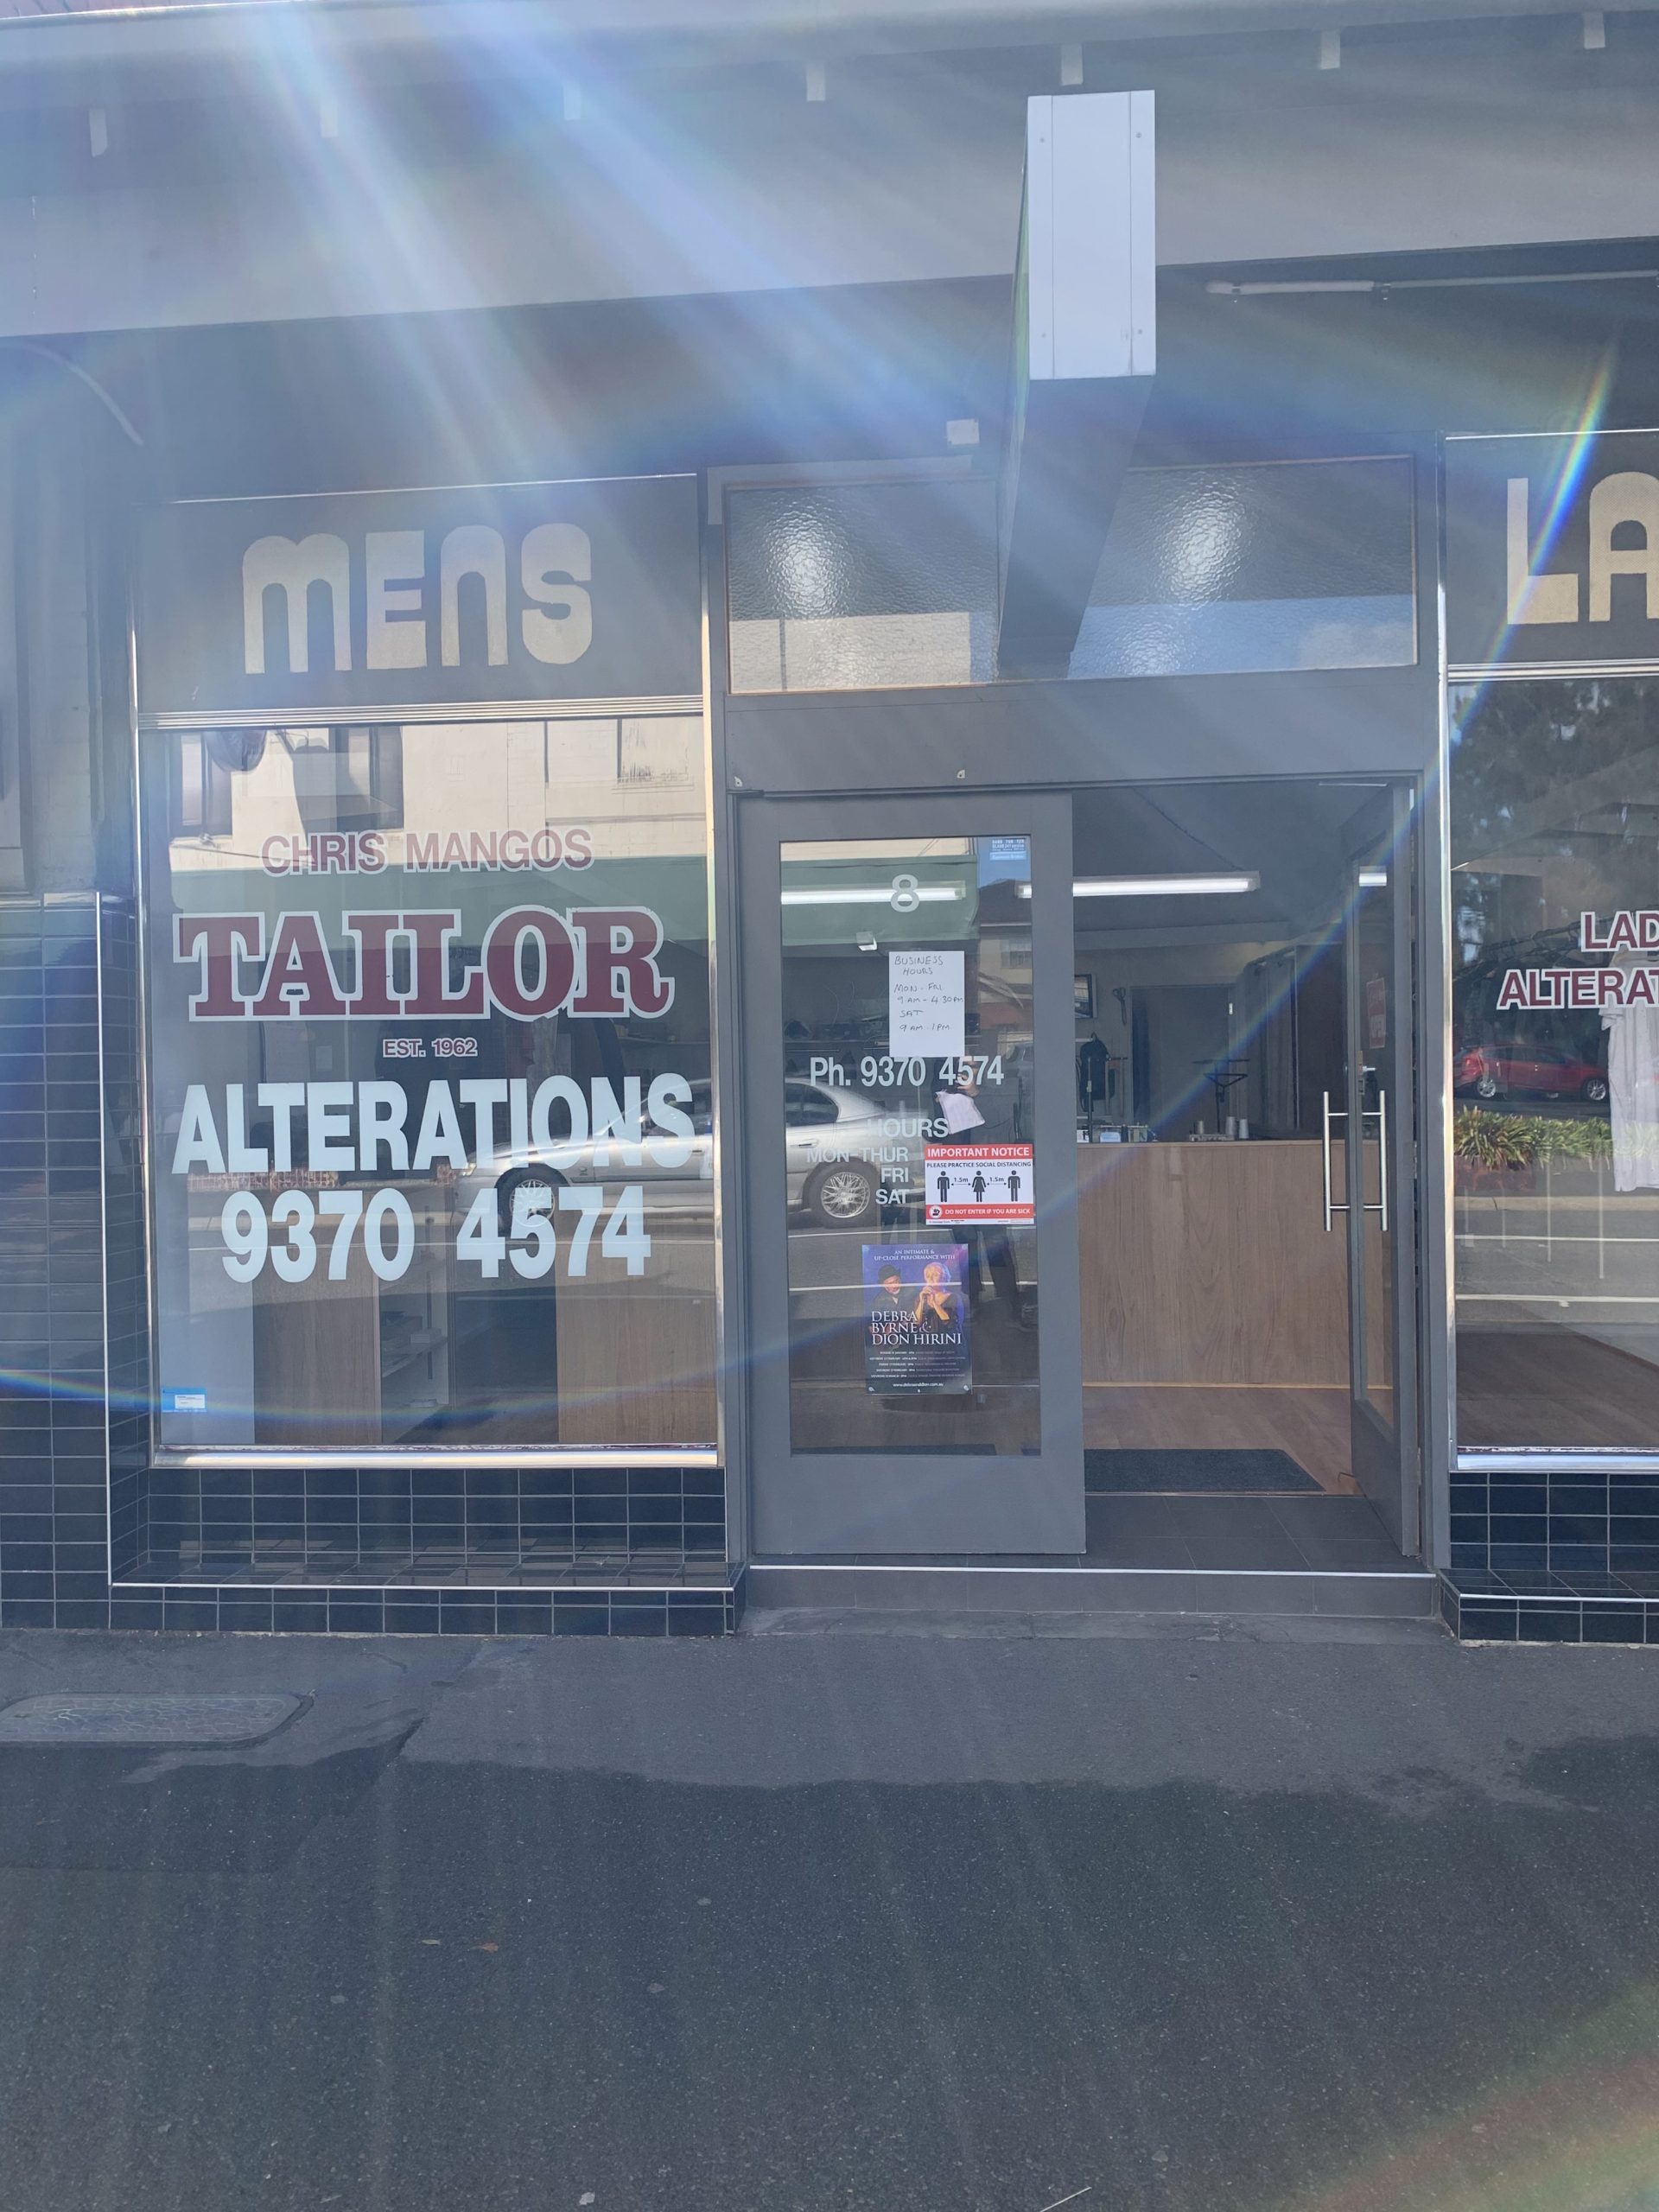 Store & Alterations Hours